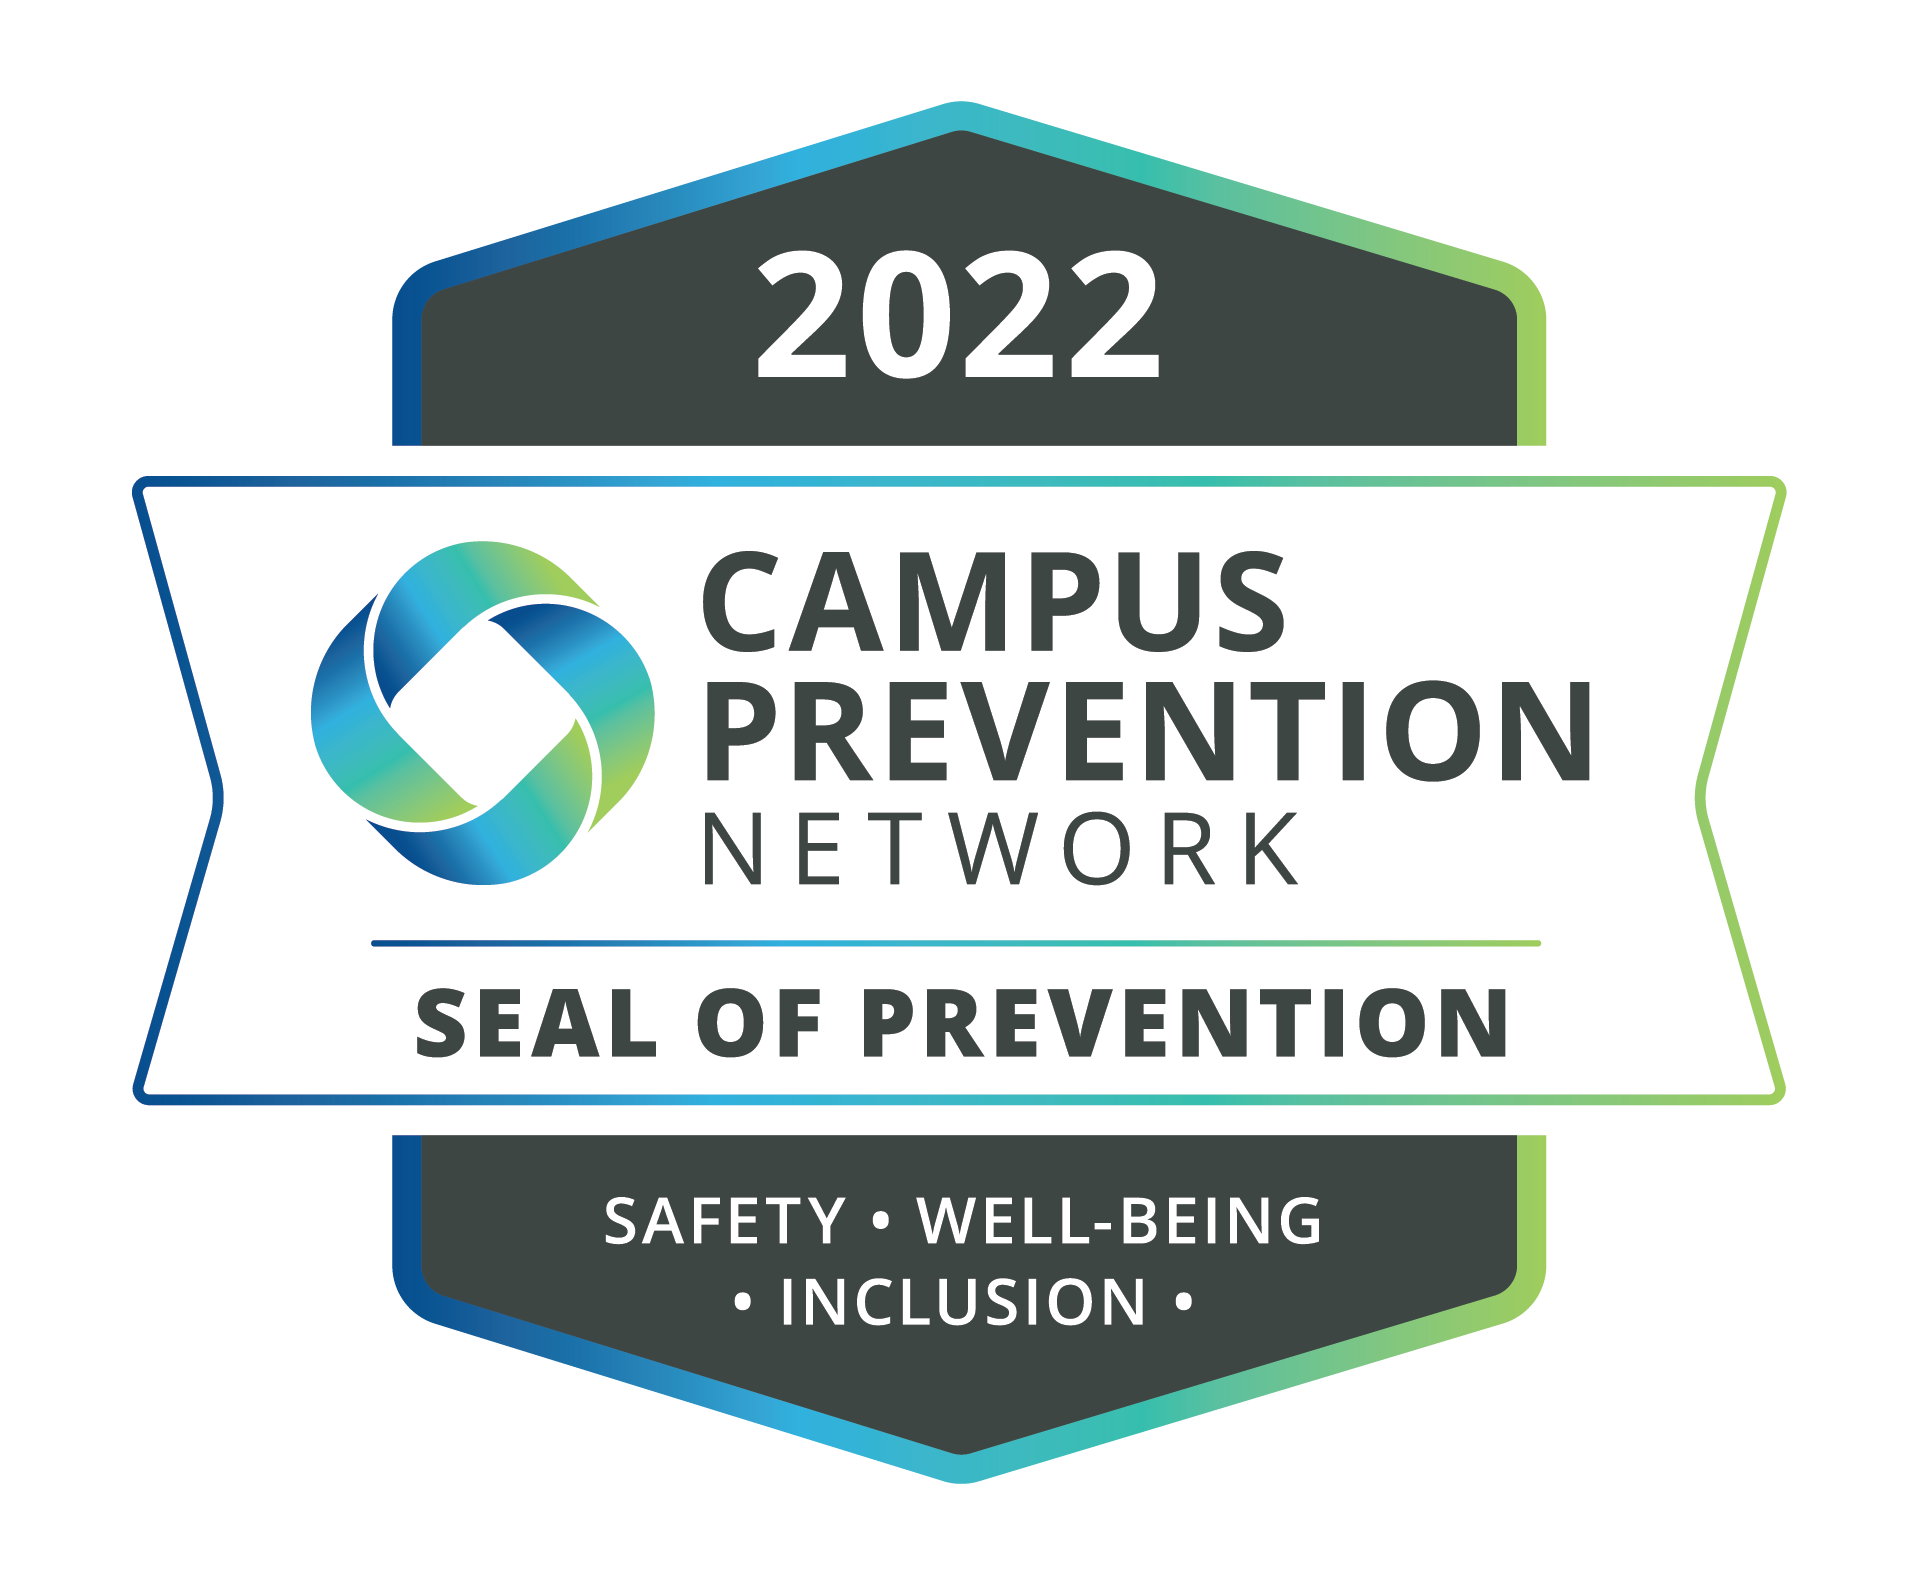 2022 Campus Prevention Network Seal of Prevention: Safety - Wellbeing - Inclusion